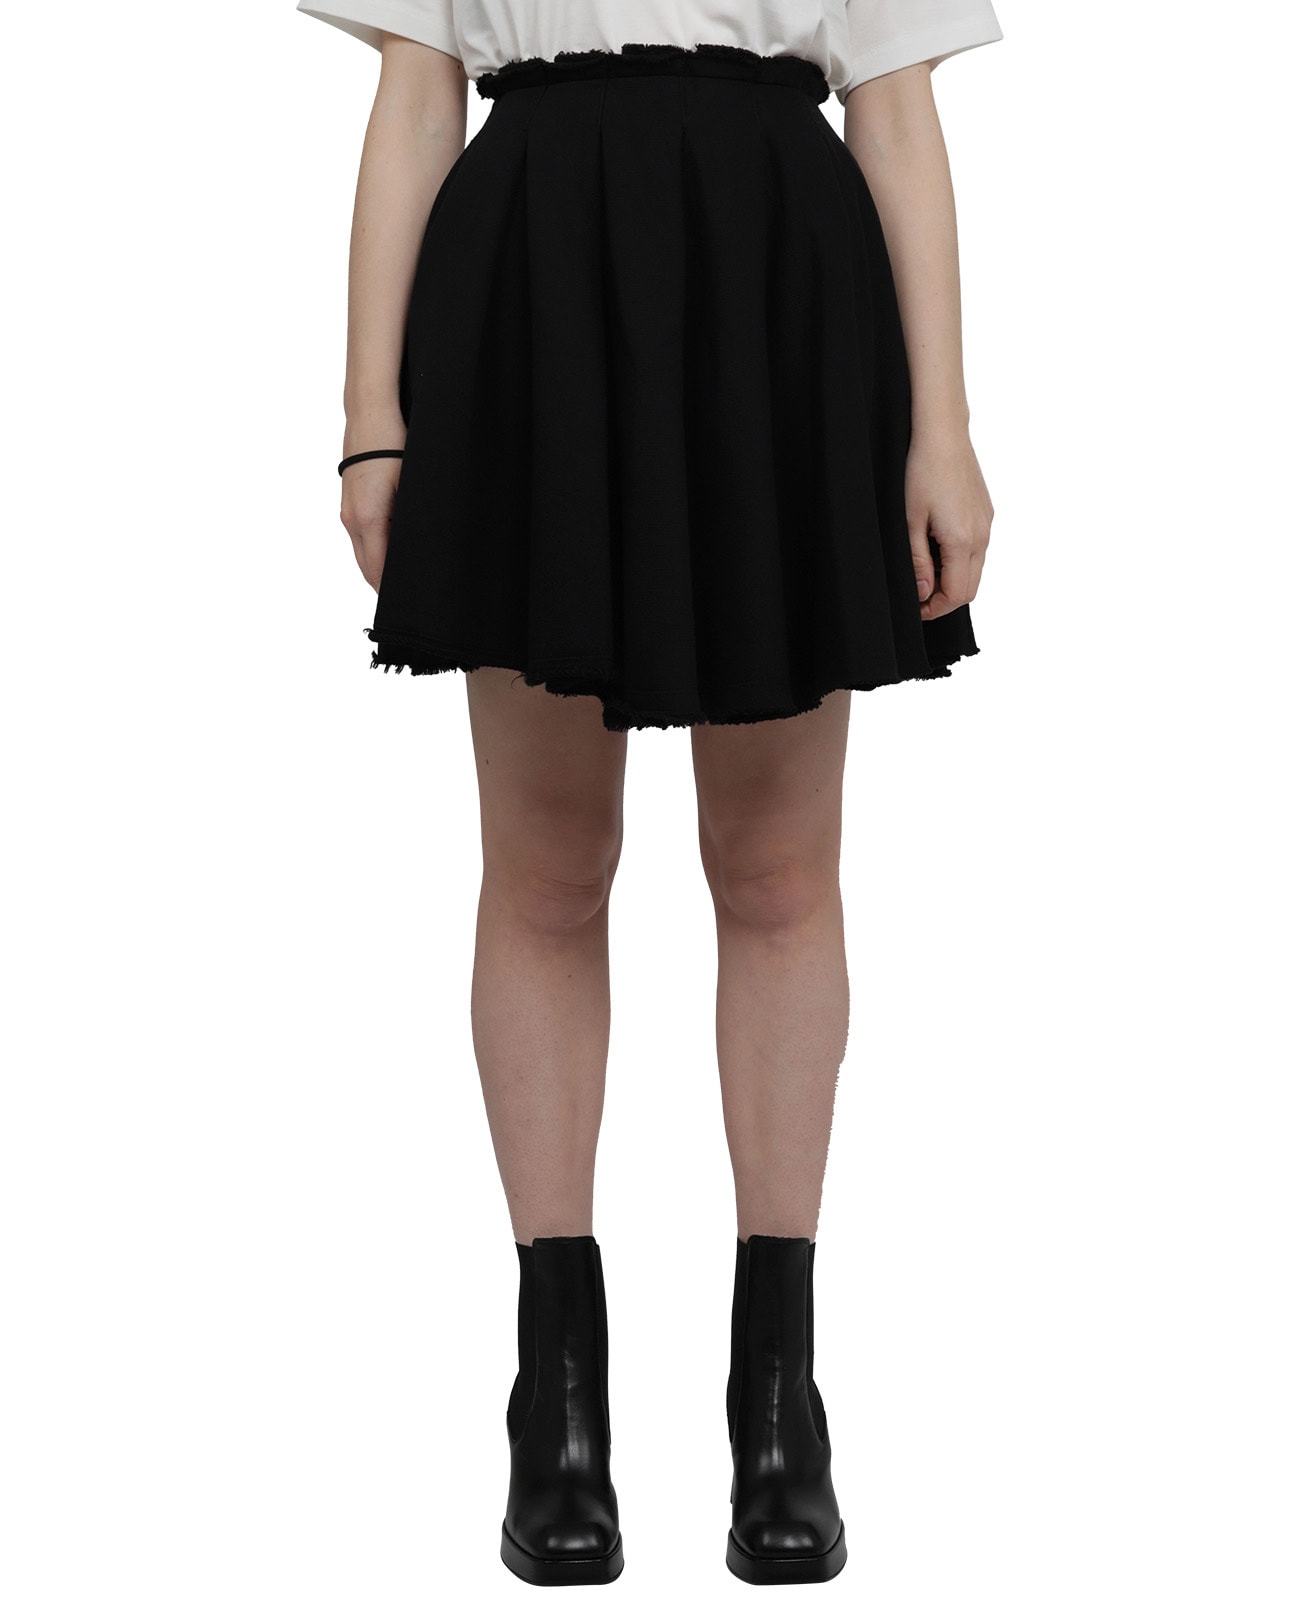 Liberal Youth Ministry Black Skirt